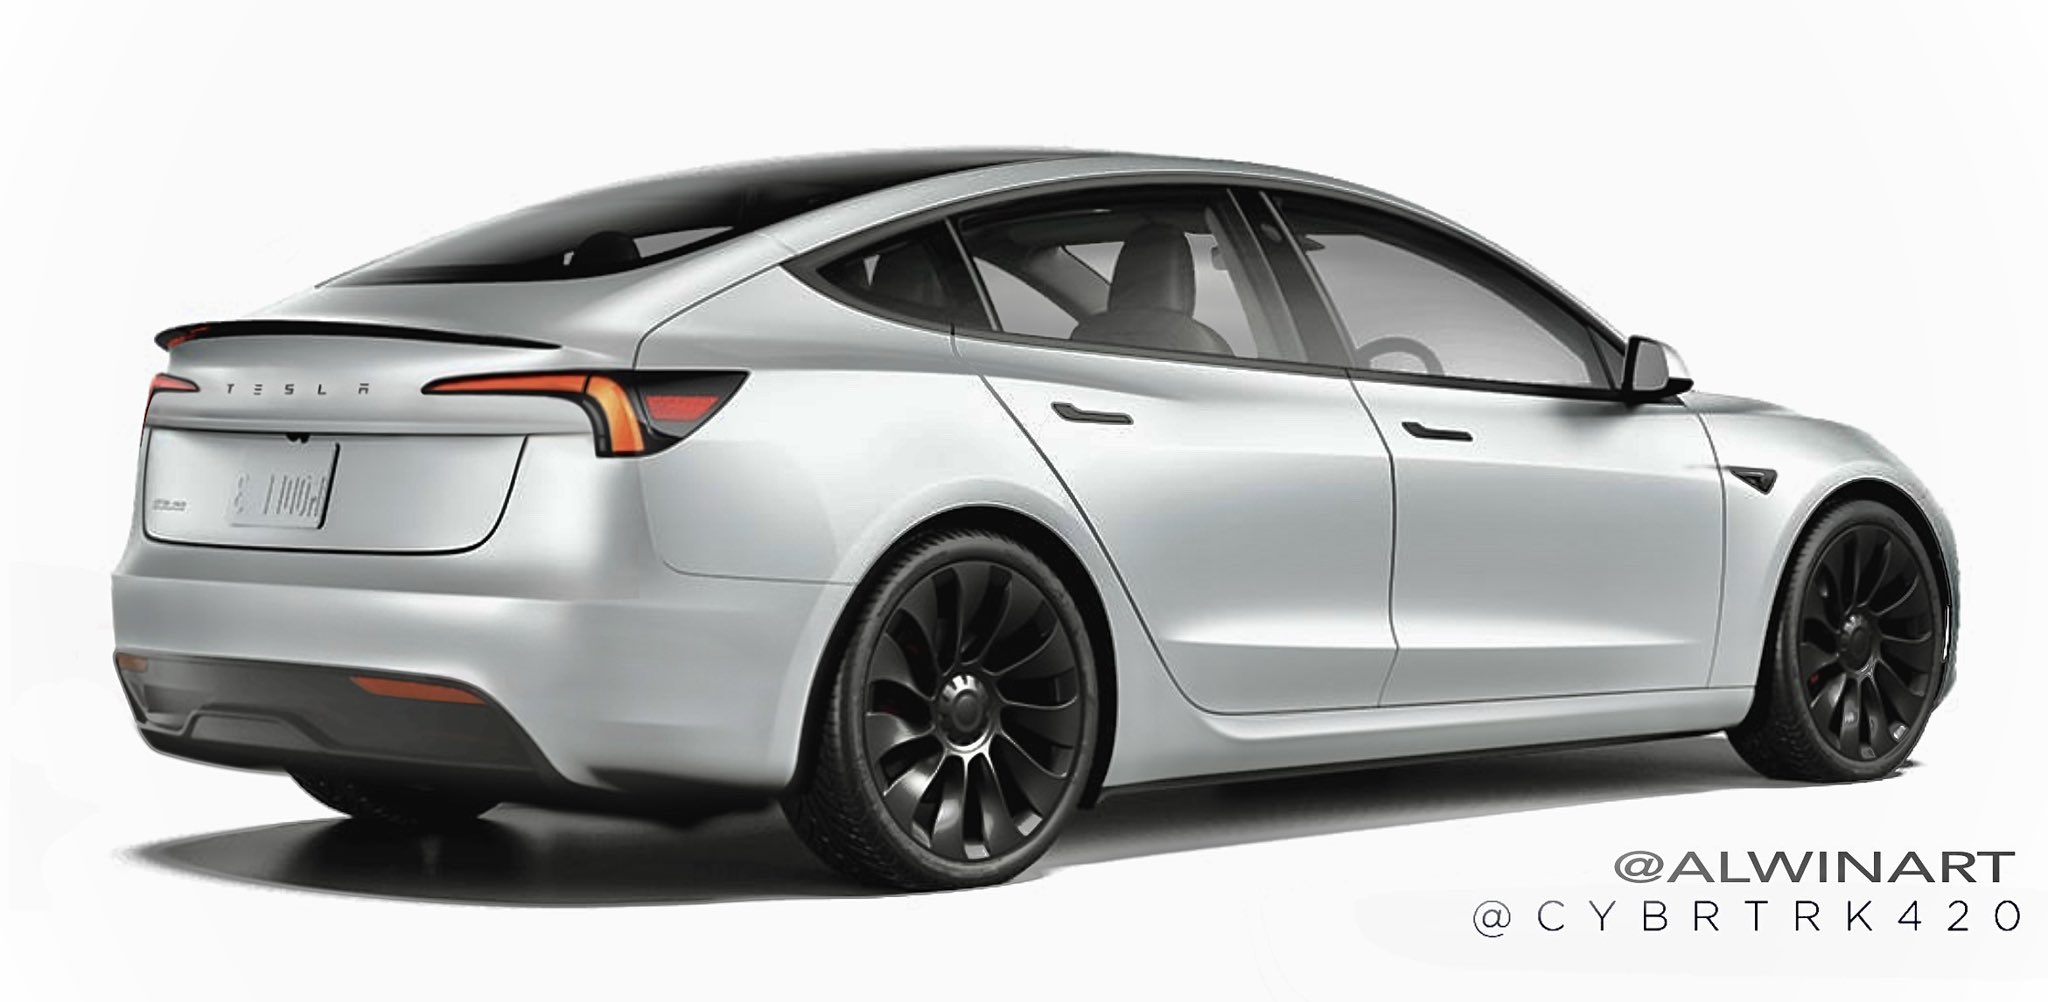 Renders of the all-new Tesla Model 3 Highland have surfaced